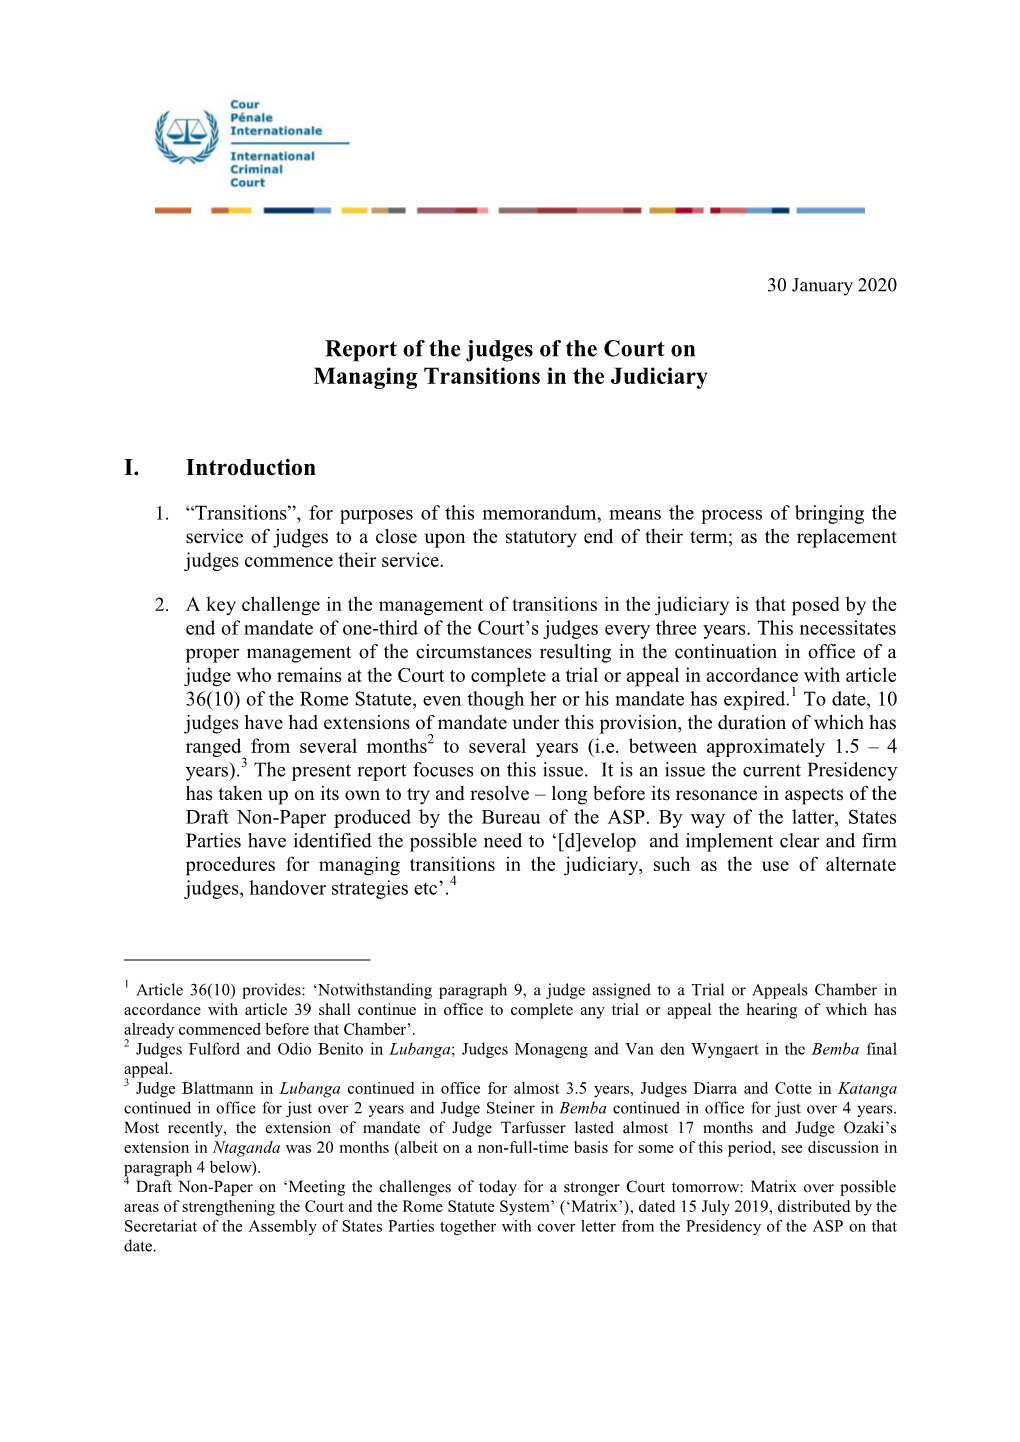 Report of the Judges of the Court on Managing Transitions in the Judiciary